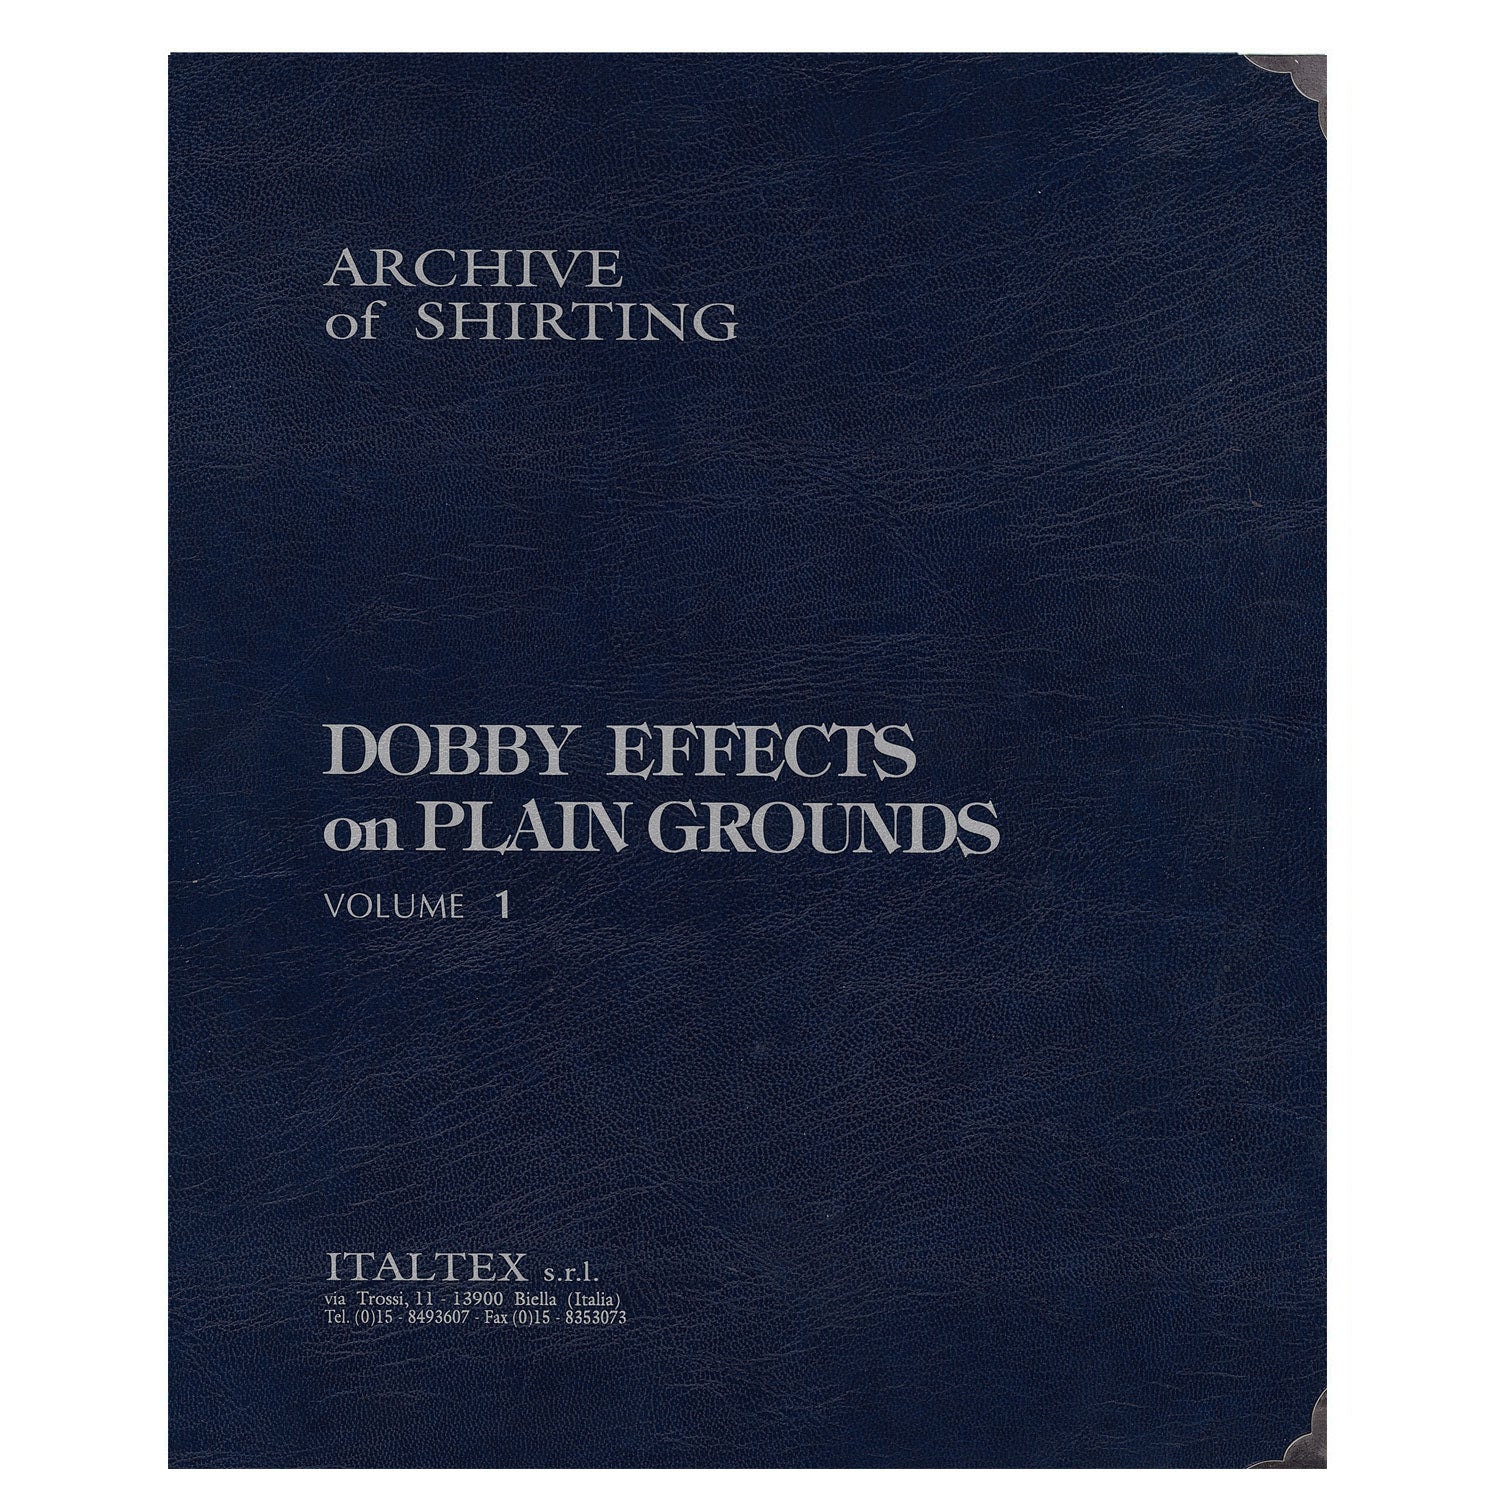 Blue, hardback leather-like cover  on which is written: Archive of Shirting, Dobby Effects on Plain Grounds Volume 1, Italtex Srl, Via Trossi, 11 - 13900 Biella Italy of the Italtex photographic book 